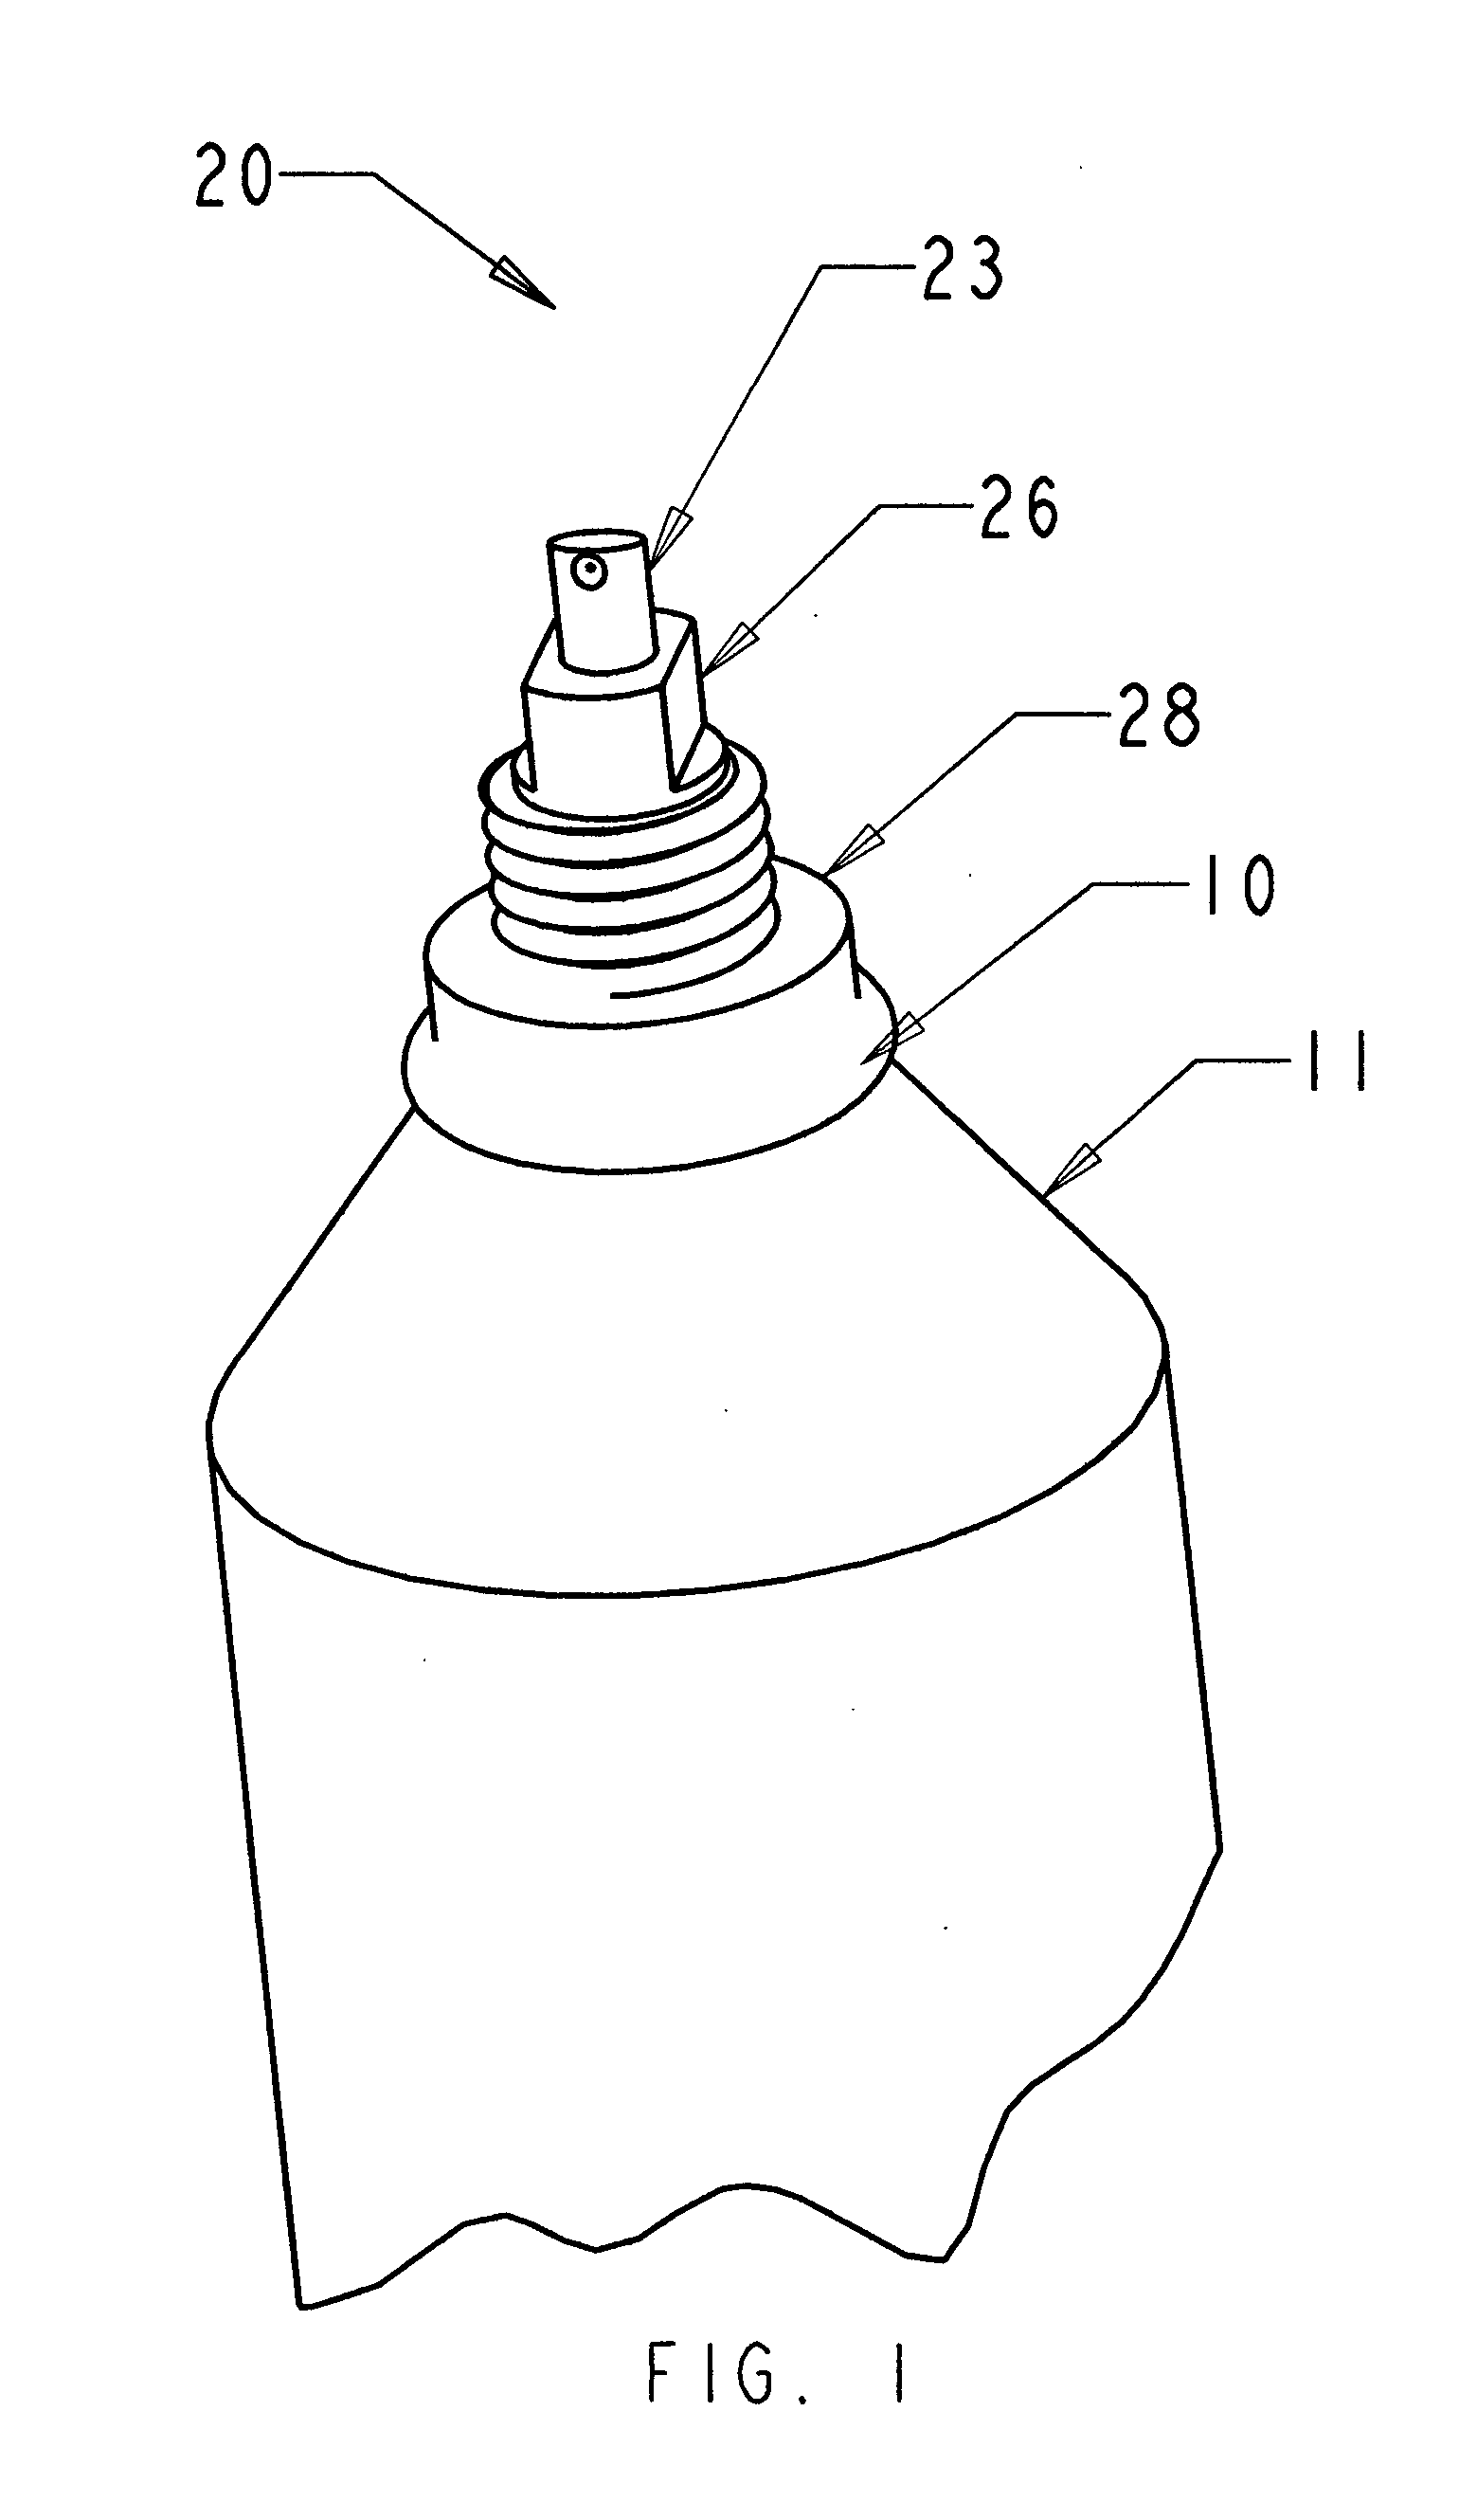 Valve wrench assembly kit for restoring purposed function to a compromised aerosol container